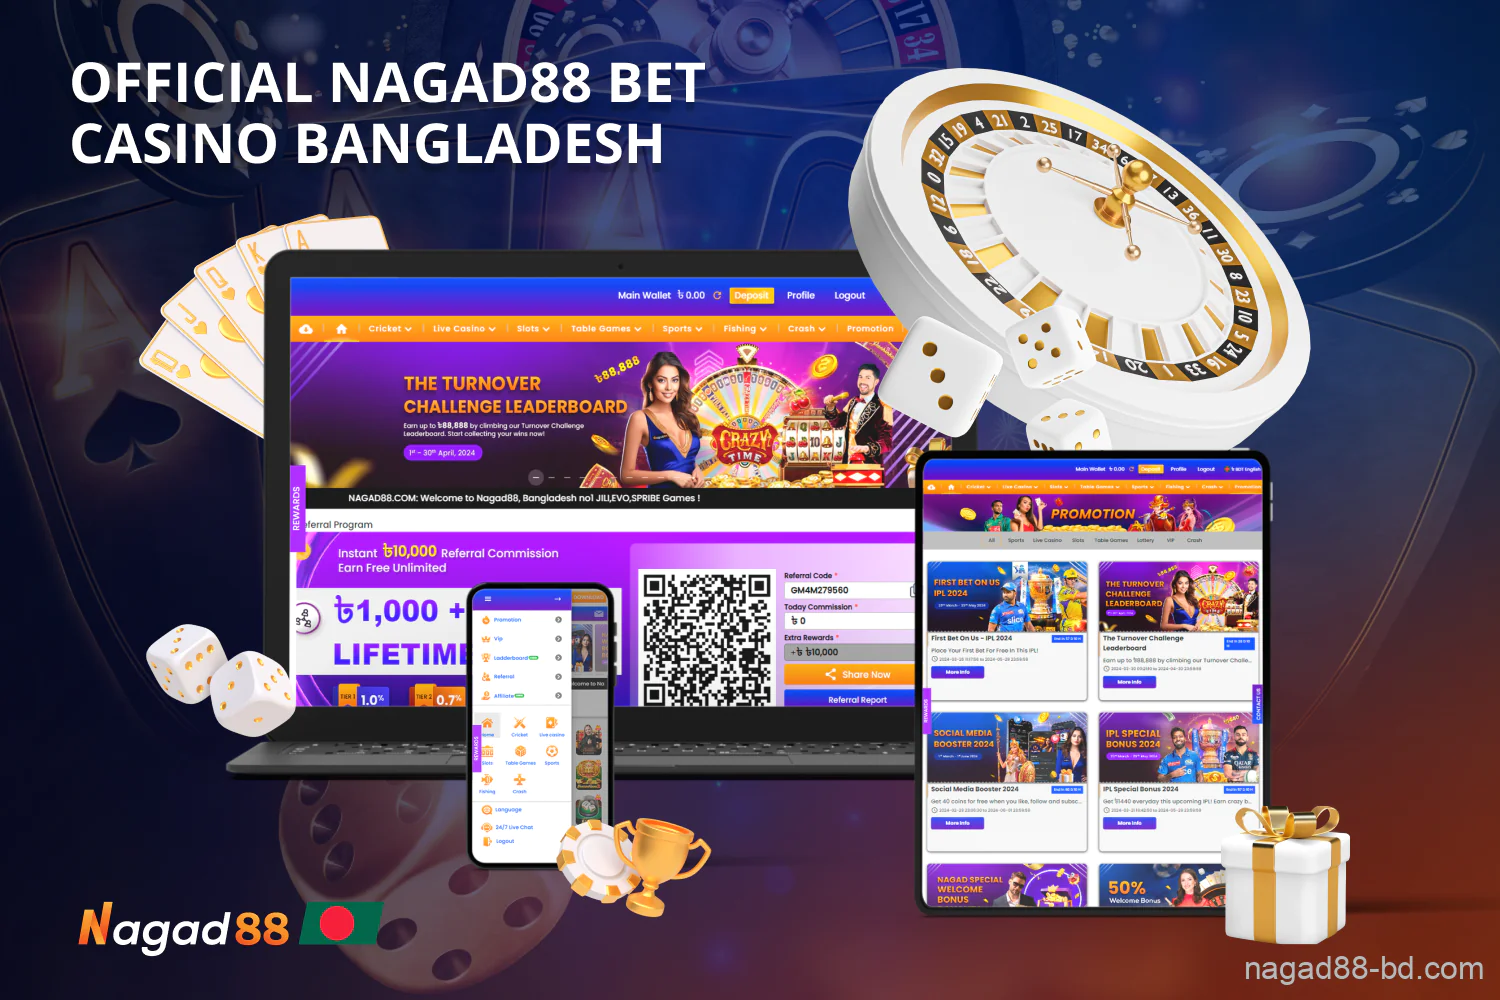 Nagad88 Casino offers Bangladeshi users table games, fishing games, LIVE casino, crash games, instant games and more